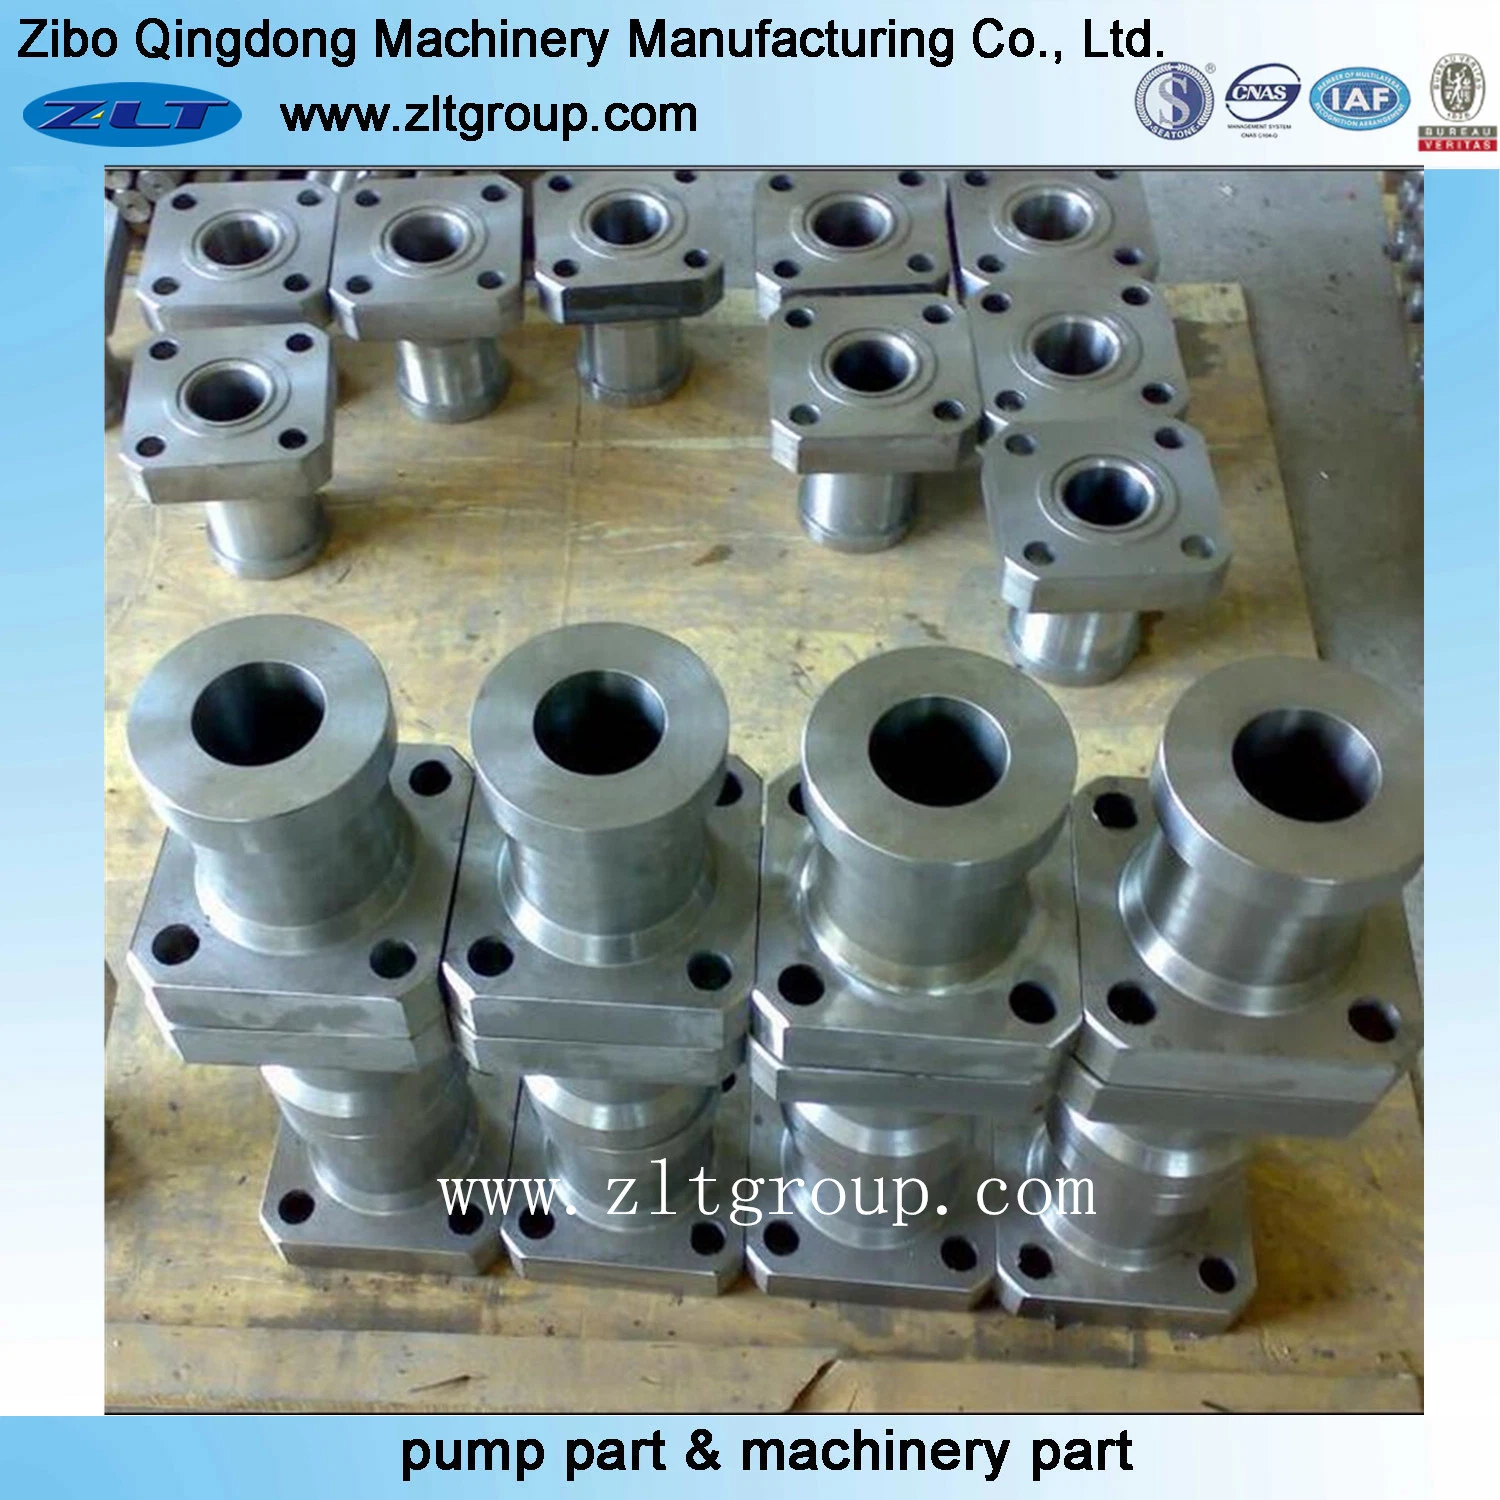 Stainless Steel/Carbon Steel Pump Flange with CNC Machining in Sand Casting